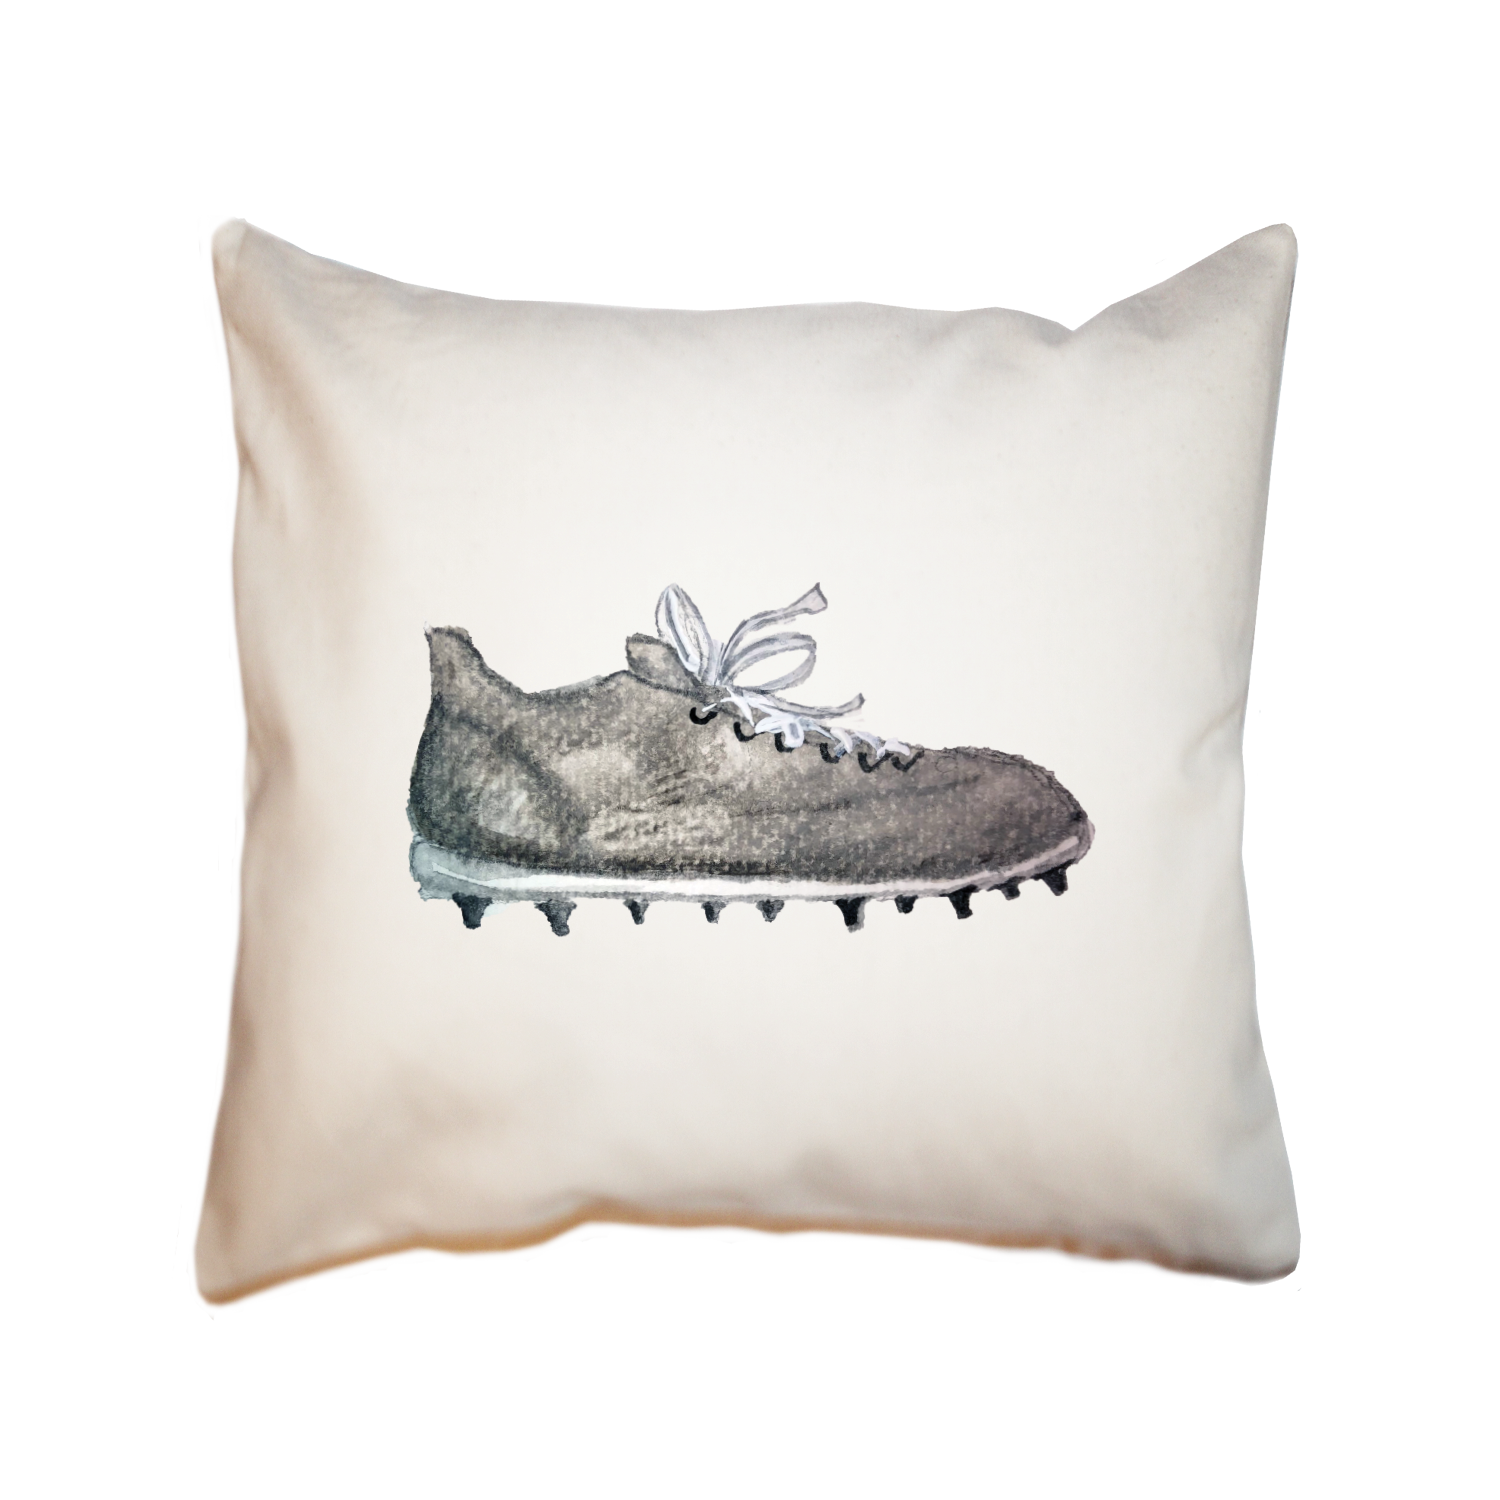 cleat square pillow